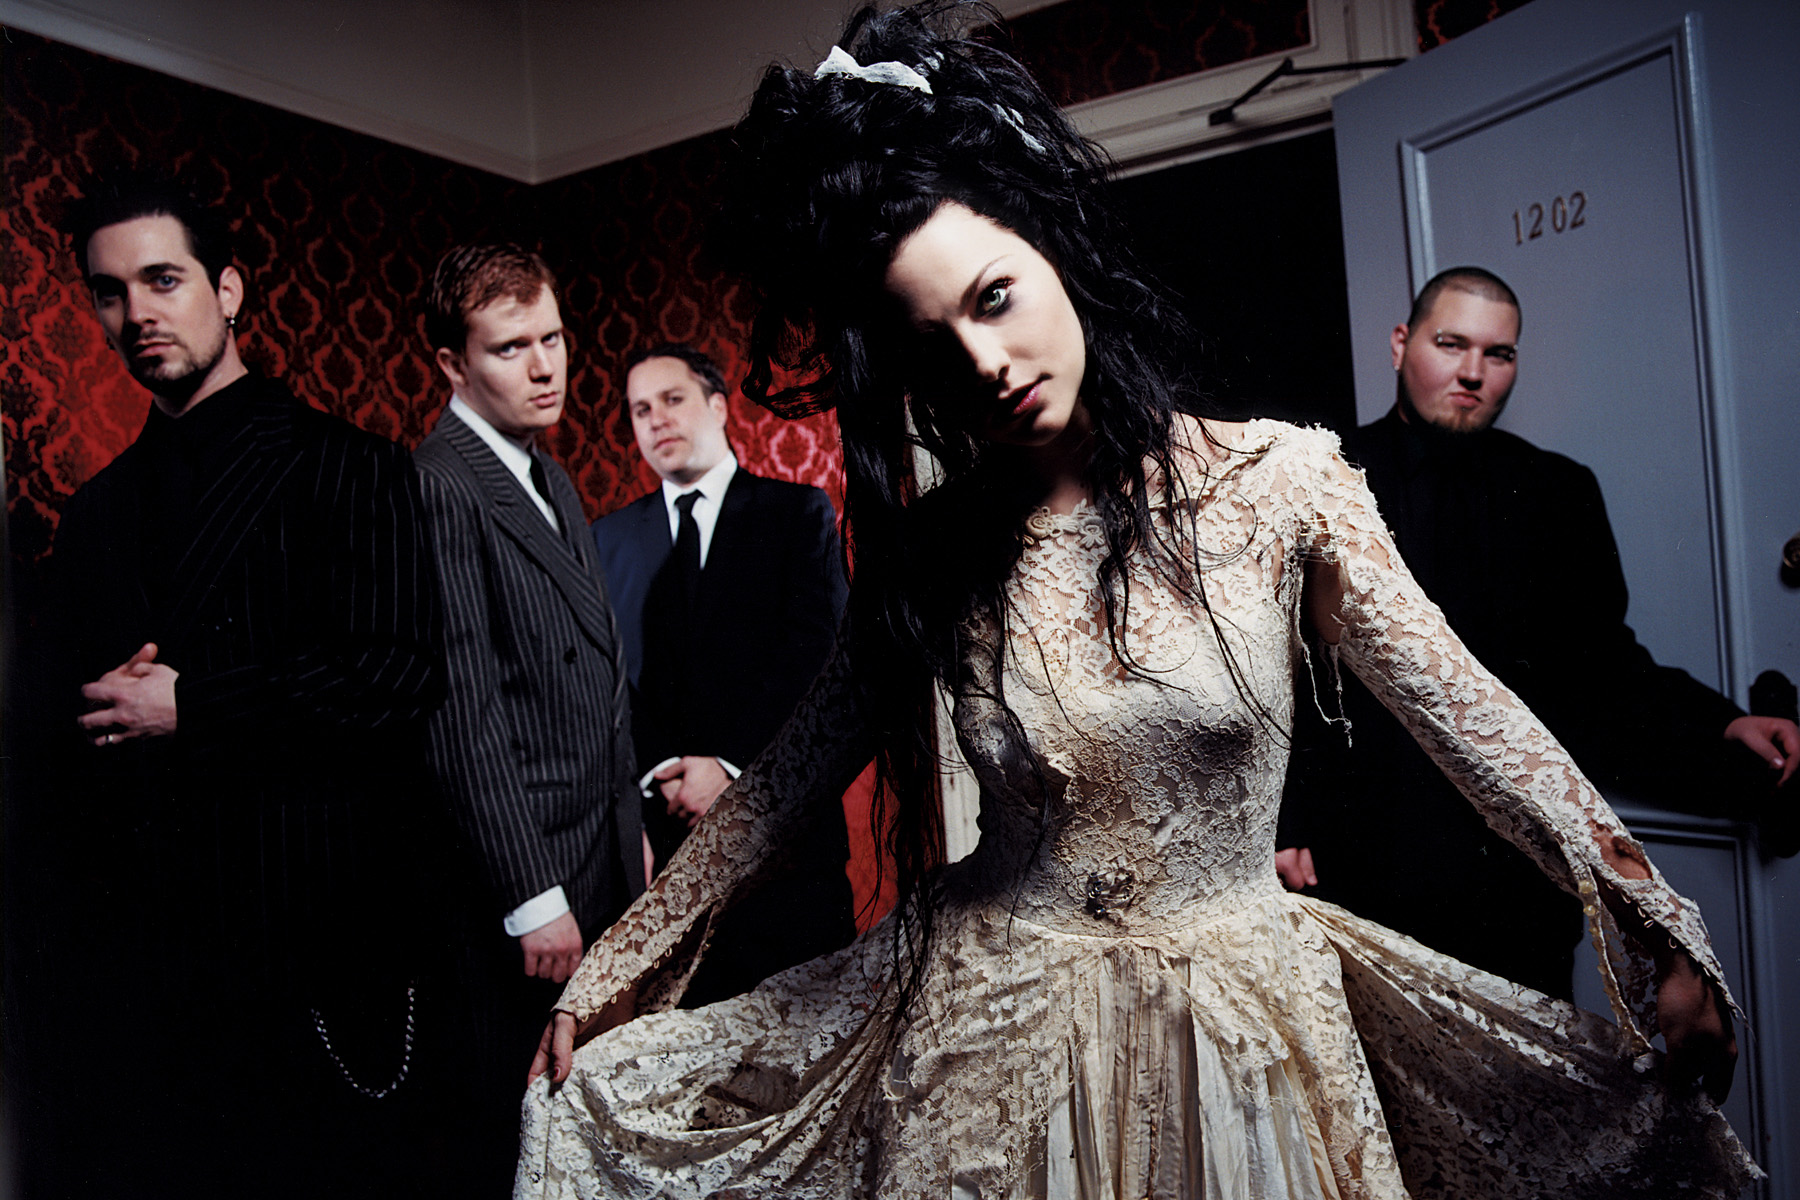 1800x1200
Keywords: anywhere but home;dvd;promo;photoshoot;evanescence;band;red